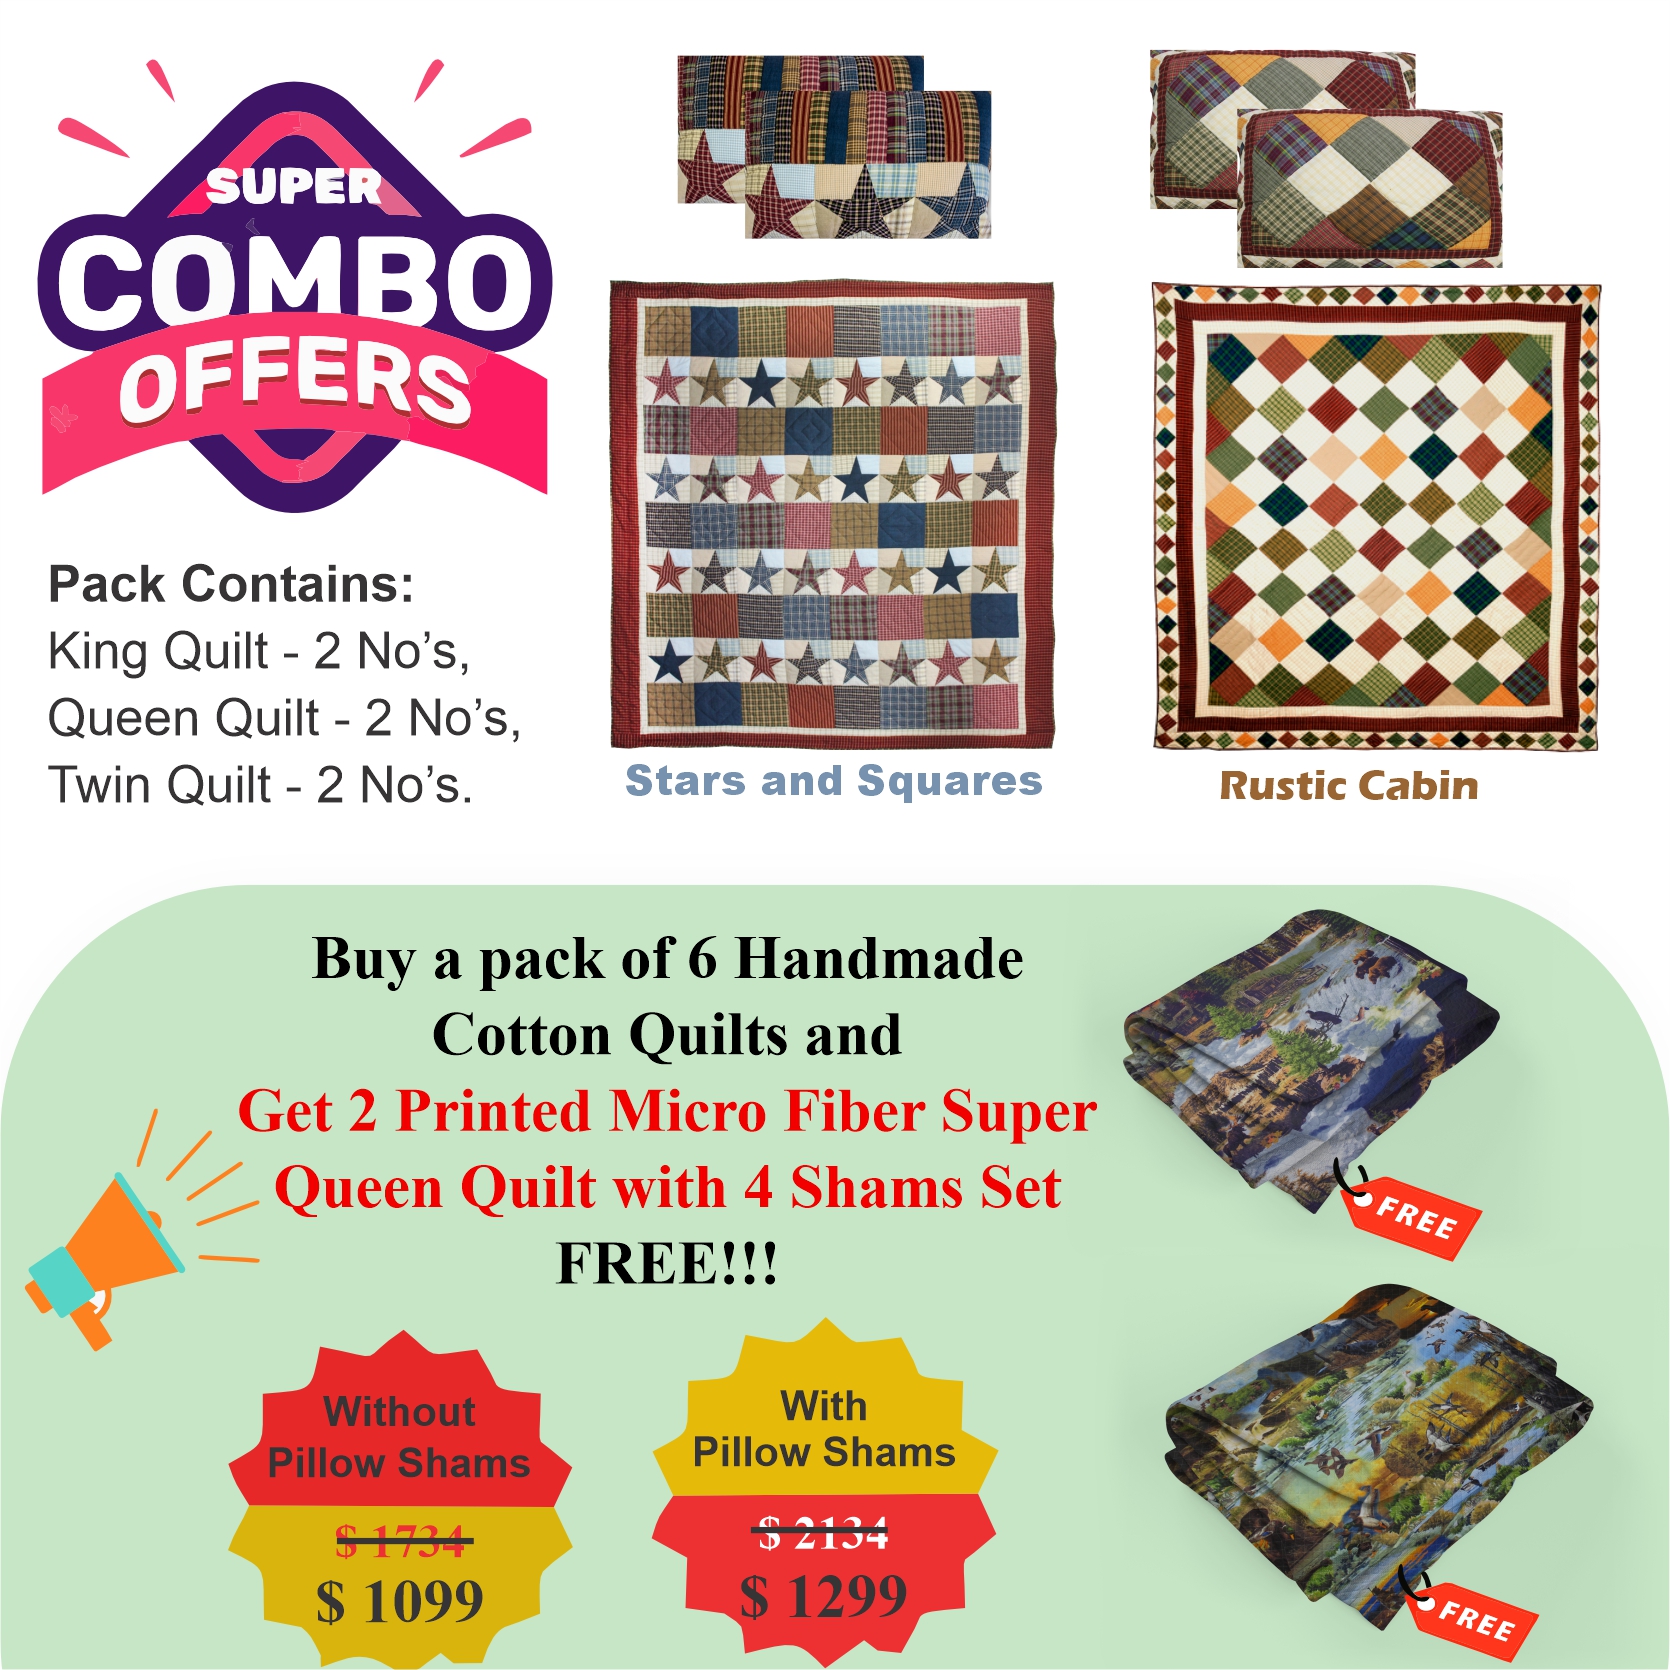 Rustic Cabin /Stars and Squares  - Pack of 6 handmade cotton quilts | Buy 6 cotton quilts and get 2 Printed Microfiber Super Queen Quilt with 4 Shams